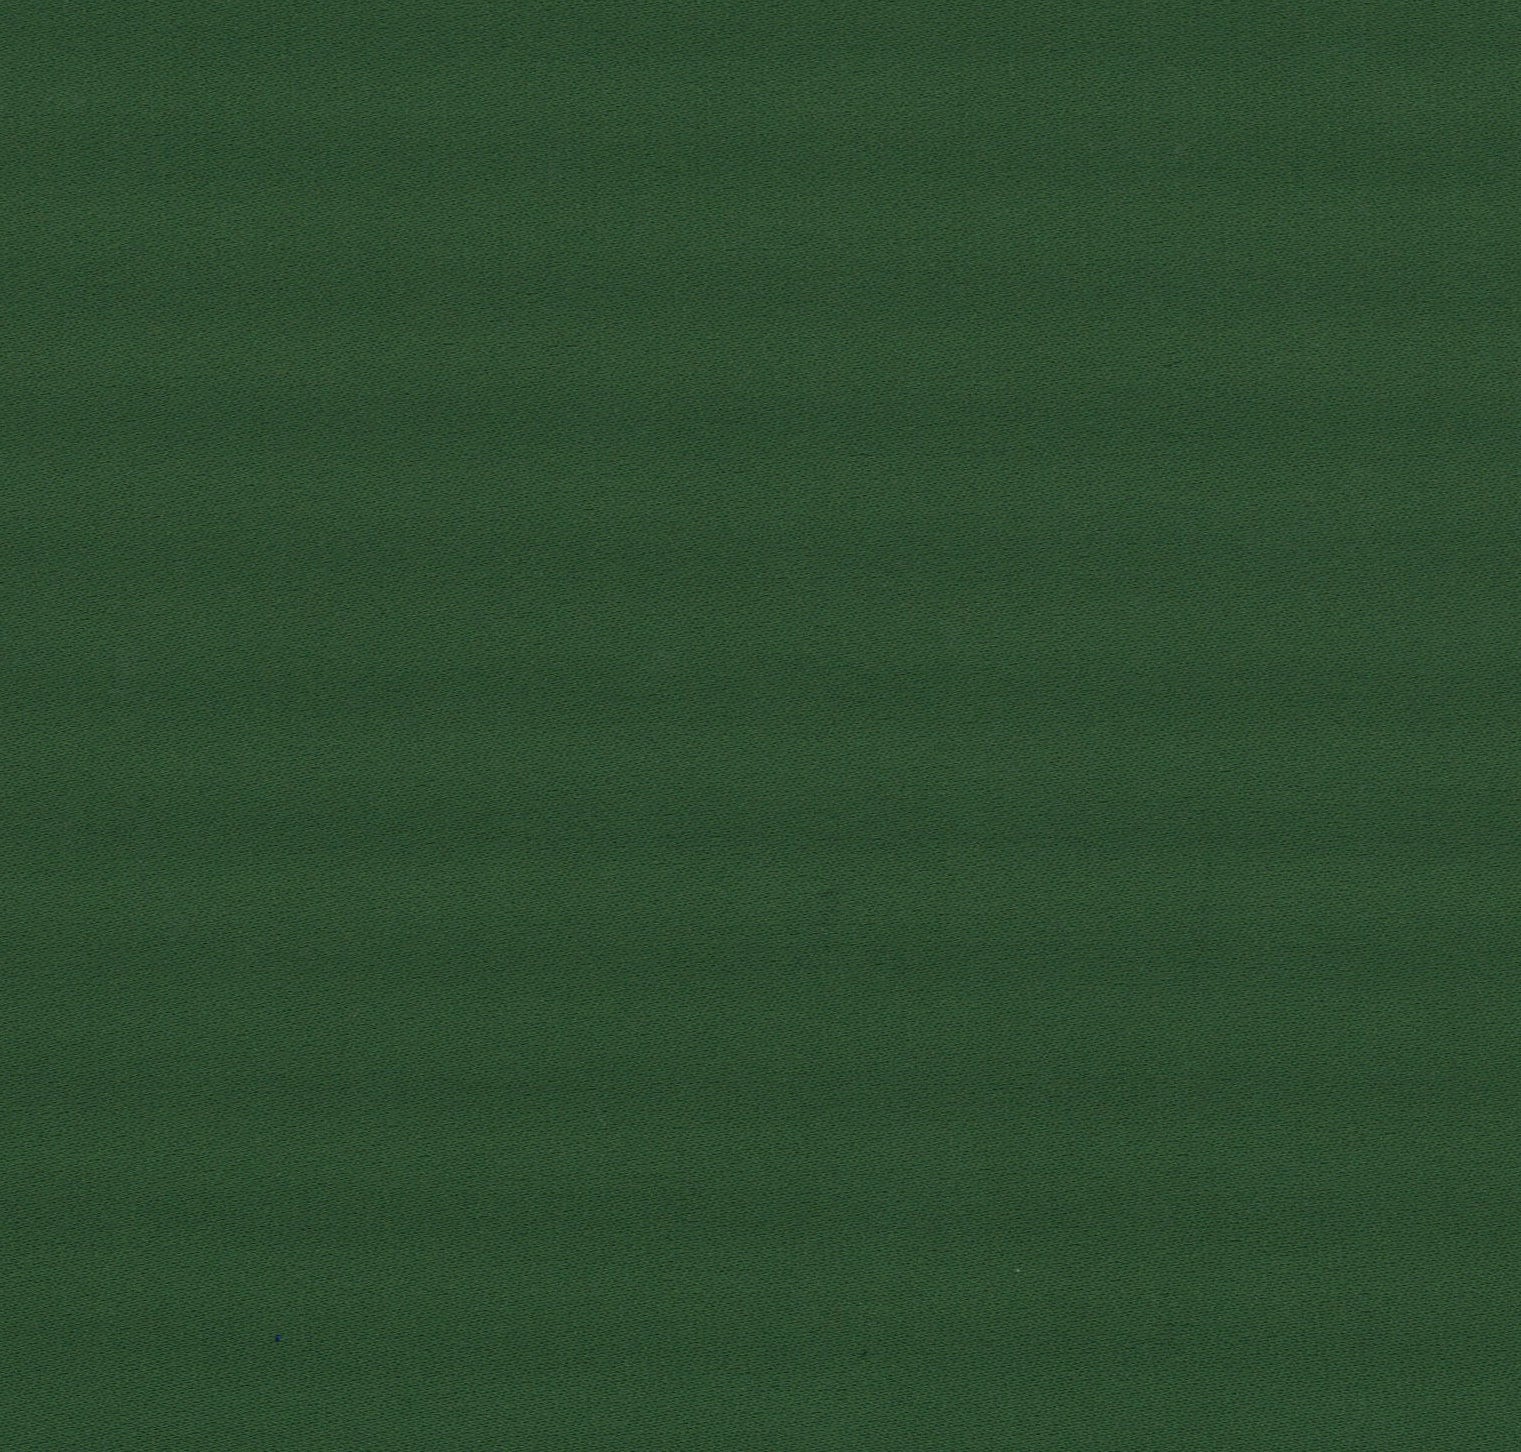 36033-03 Green Polyester Plain Dyed 233g/yd 56" green plain dyed polyester woven Solid Color - knit fabric - woven fabric - fabric company - fabric wholesale - fabric b2b - fabric factory - high quality fabric - hong kong fabric - fabric hk - acetate fabric - cotton fabric - linen fabric - metallic fabric - nylon fabric - polyester fabric - spandex fabric - chun wing hing - cwh hk - fabric worldwide ship - 針織布 - 梳織布 - 布料公司- 布料批發 - 香港布料 - 秦榮興